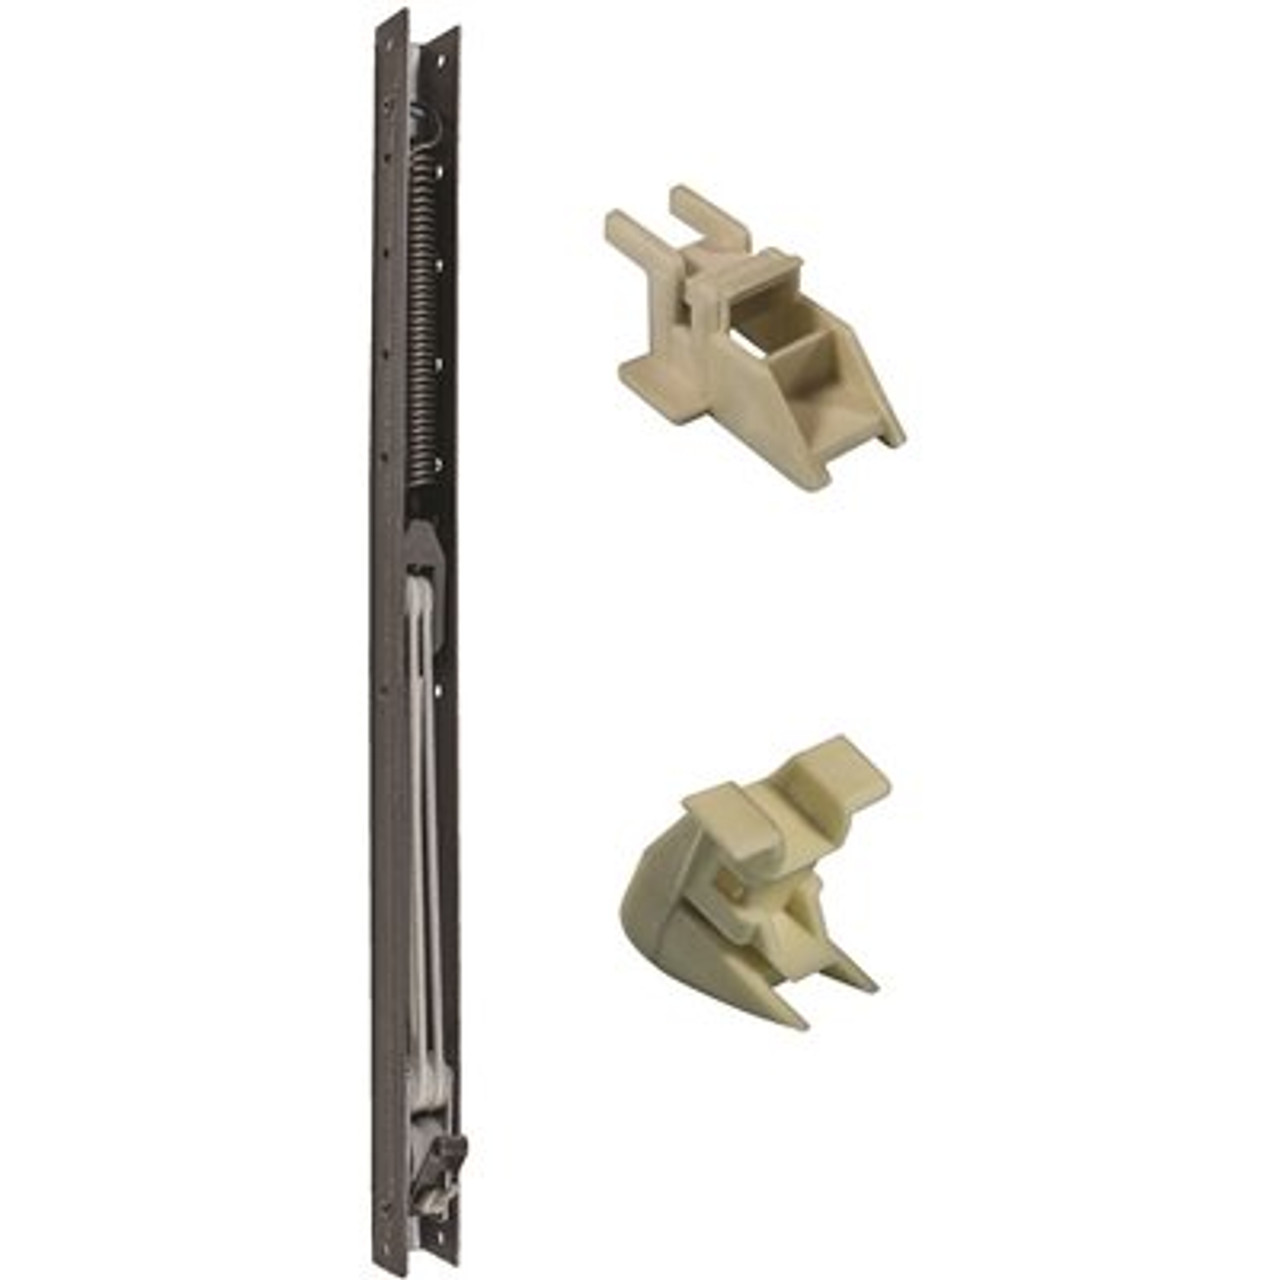 22 In. L Window Channel Balance 2140 With 9/16 In. W X 5/8 In. D Top And Bottom End Brackets Attached